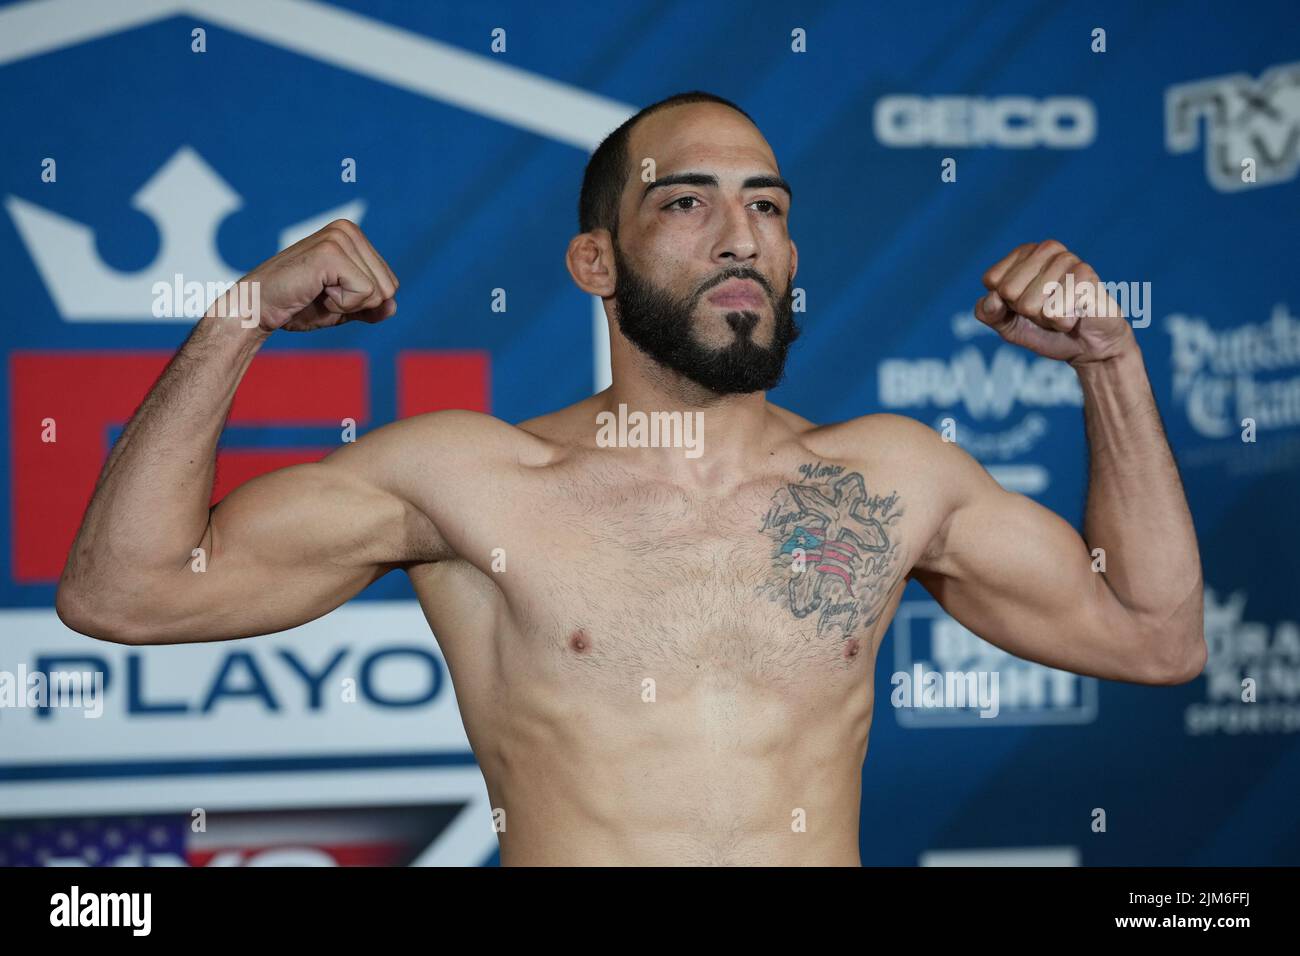 NEW YORK CITY, NY - August 4: Ricardo Jimenez steps on the scale for the official weigh-ins at The New Yorker Hotel for 2022 PFL Playoffs Semi-Finals : Official Weigh-ins on August 4, 2022 in New York City, NY, United States. (Photo by Louis Grasse/PxImages) Stock Photo